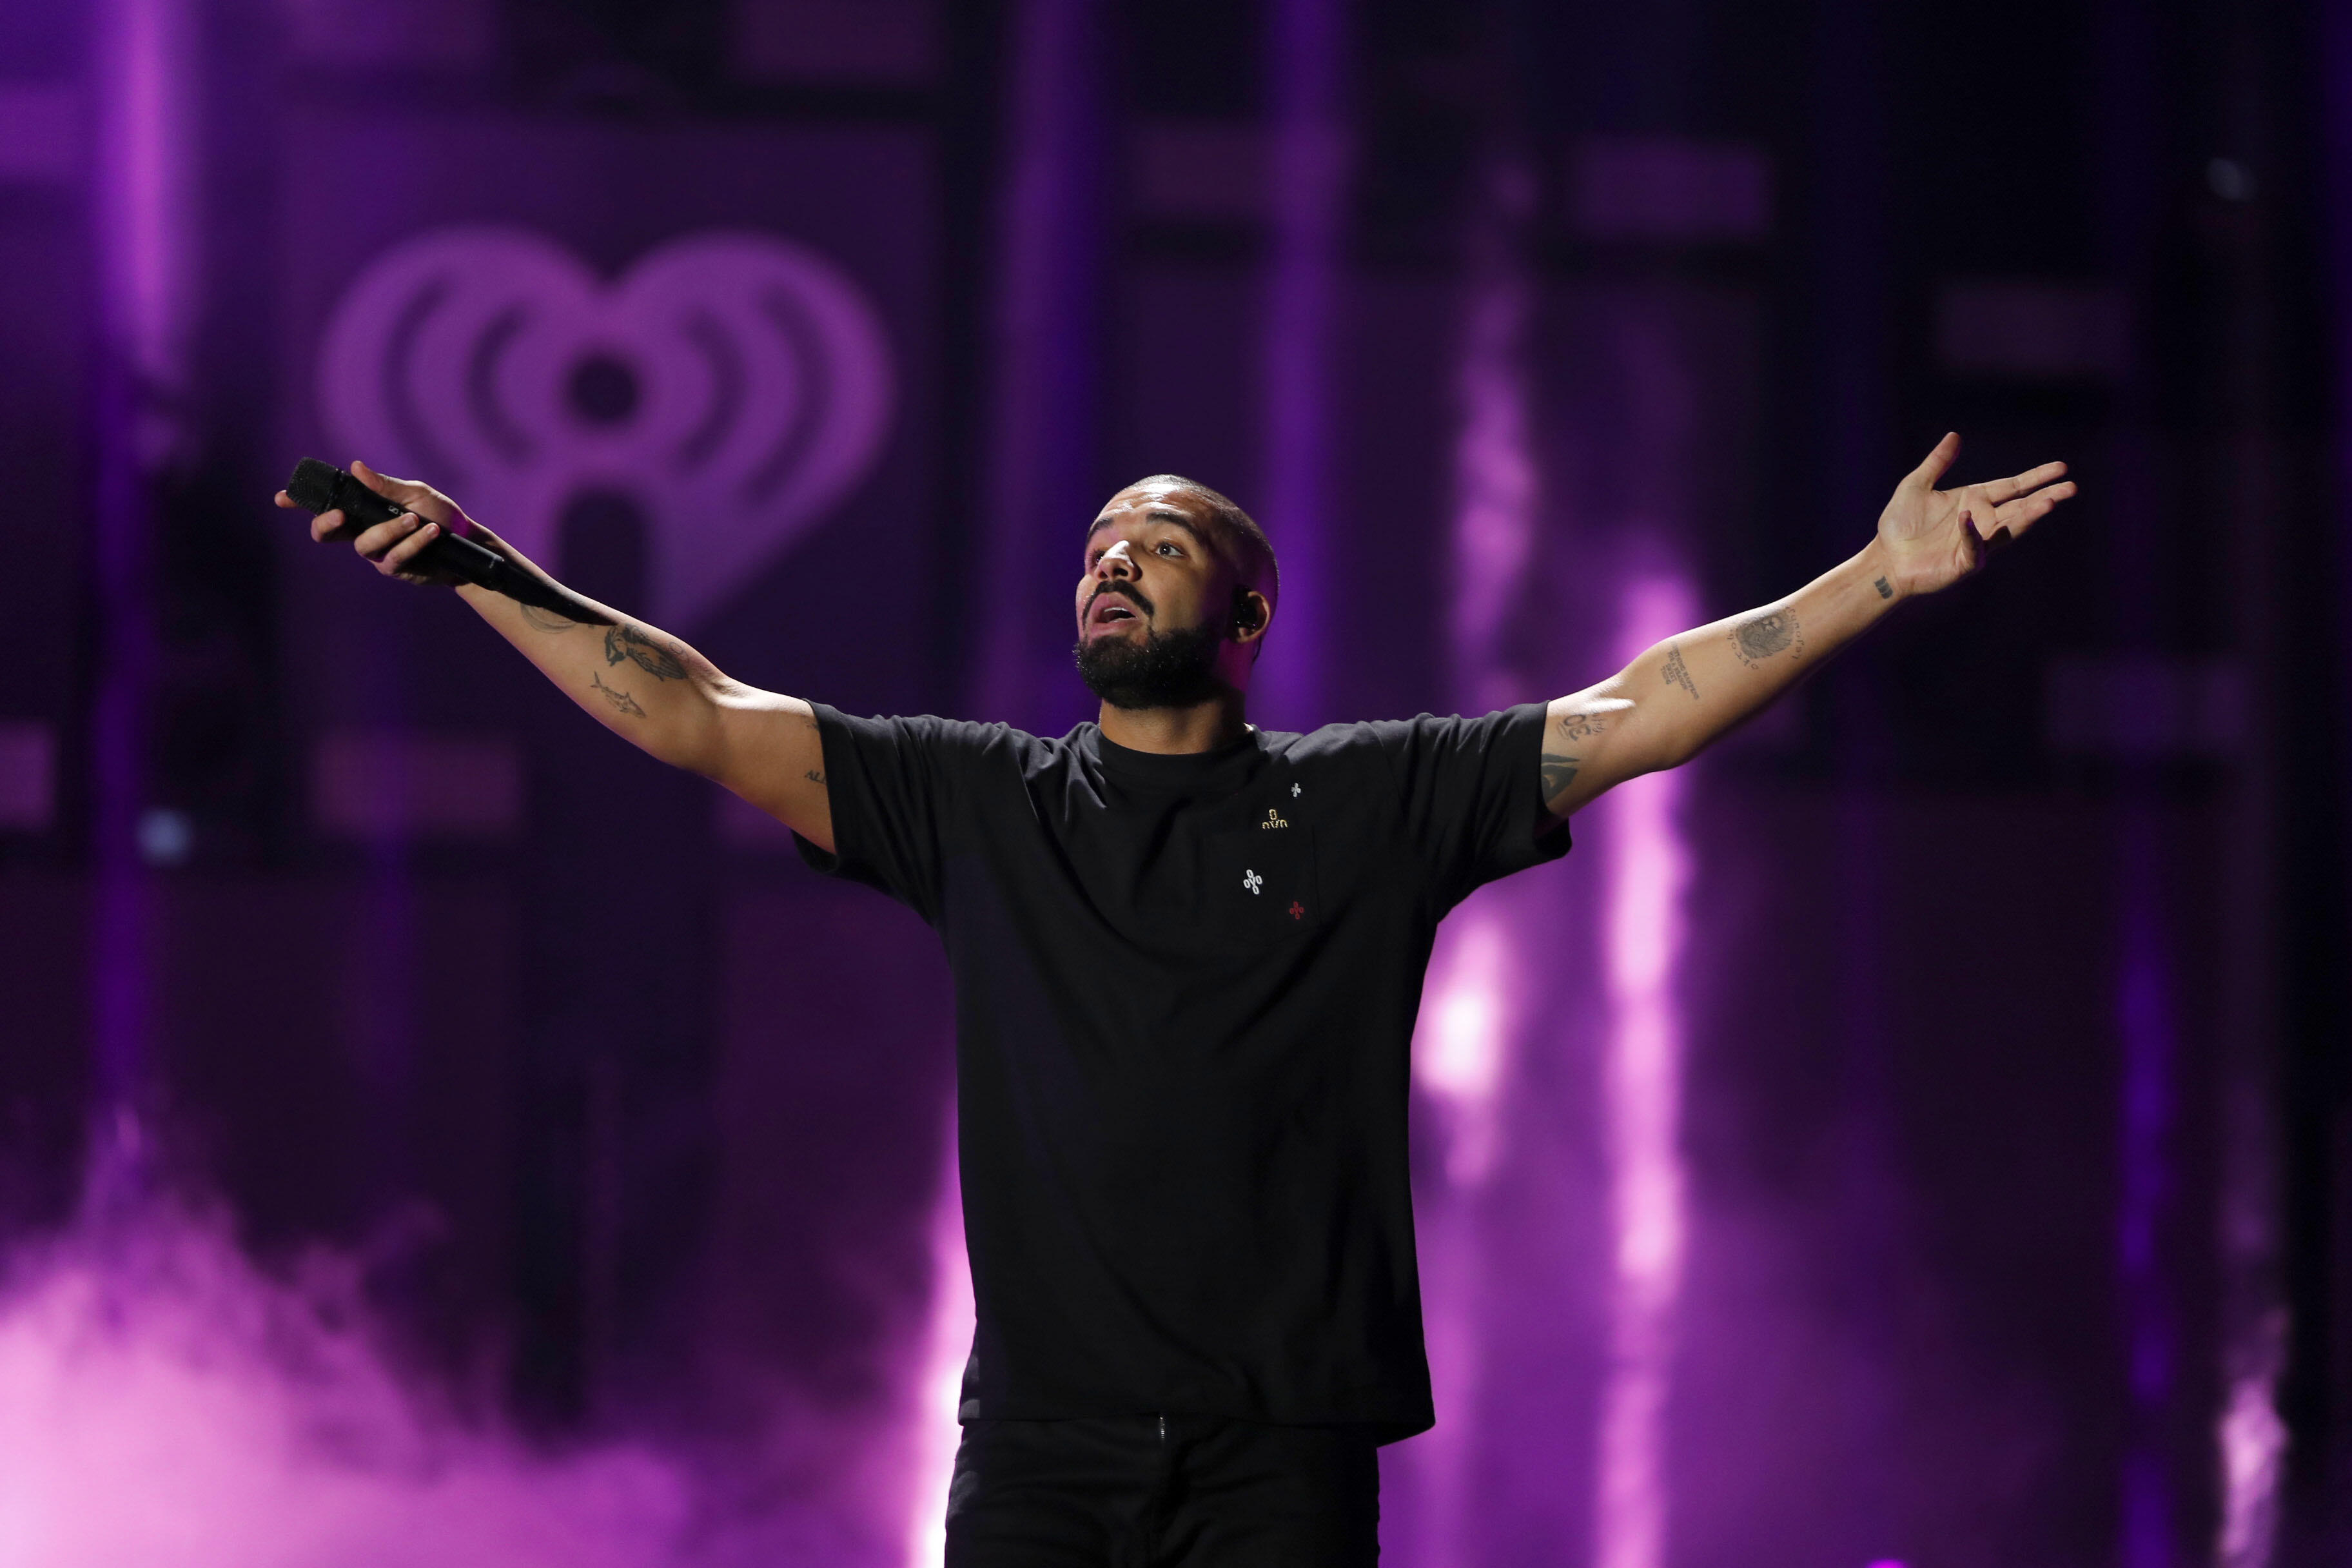 LAS VEGAS, NV - SEPTEMBER 23:  Rapper Drake performs onstage at the 2016 iHeartRadio Music Festival at T-Mobile Arena on September 23, 2016 in Las Vegas, Nevada.  (Photo by Christopher Polk/Getty Images for iHeartMedia)